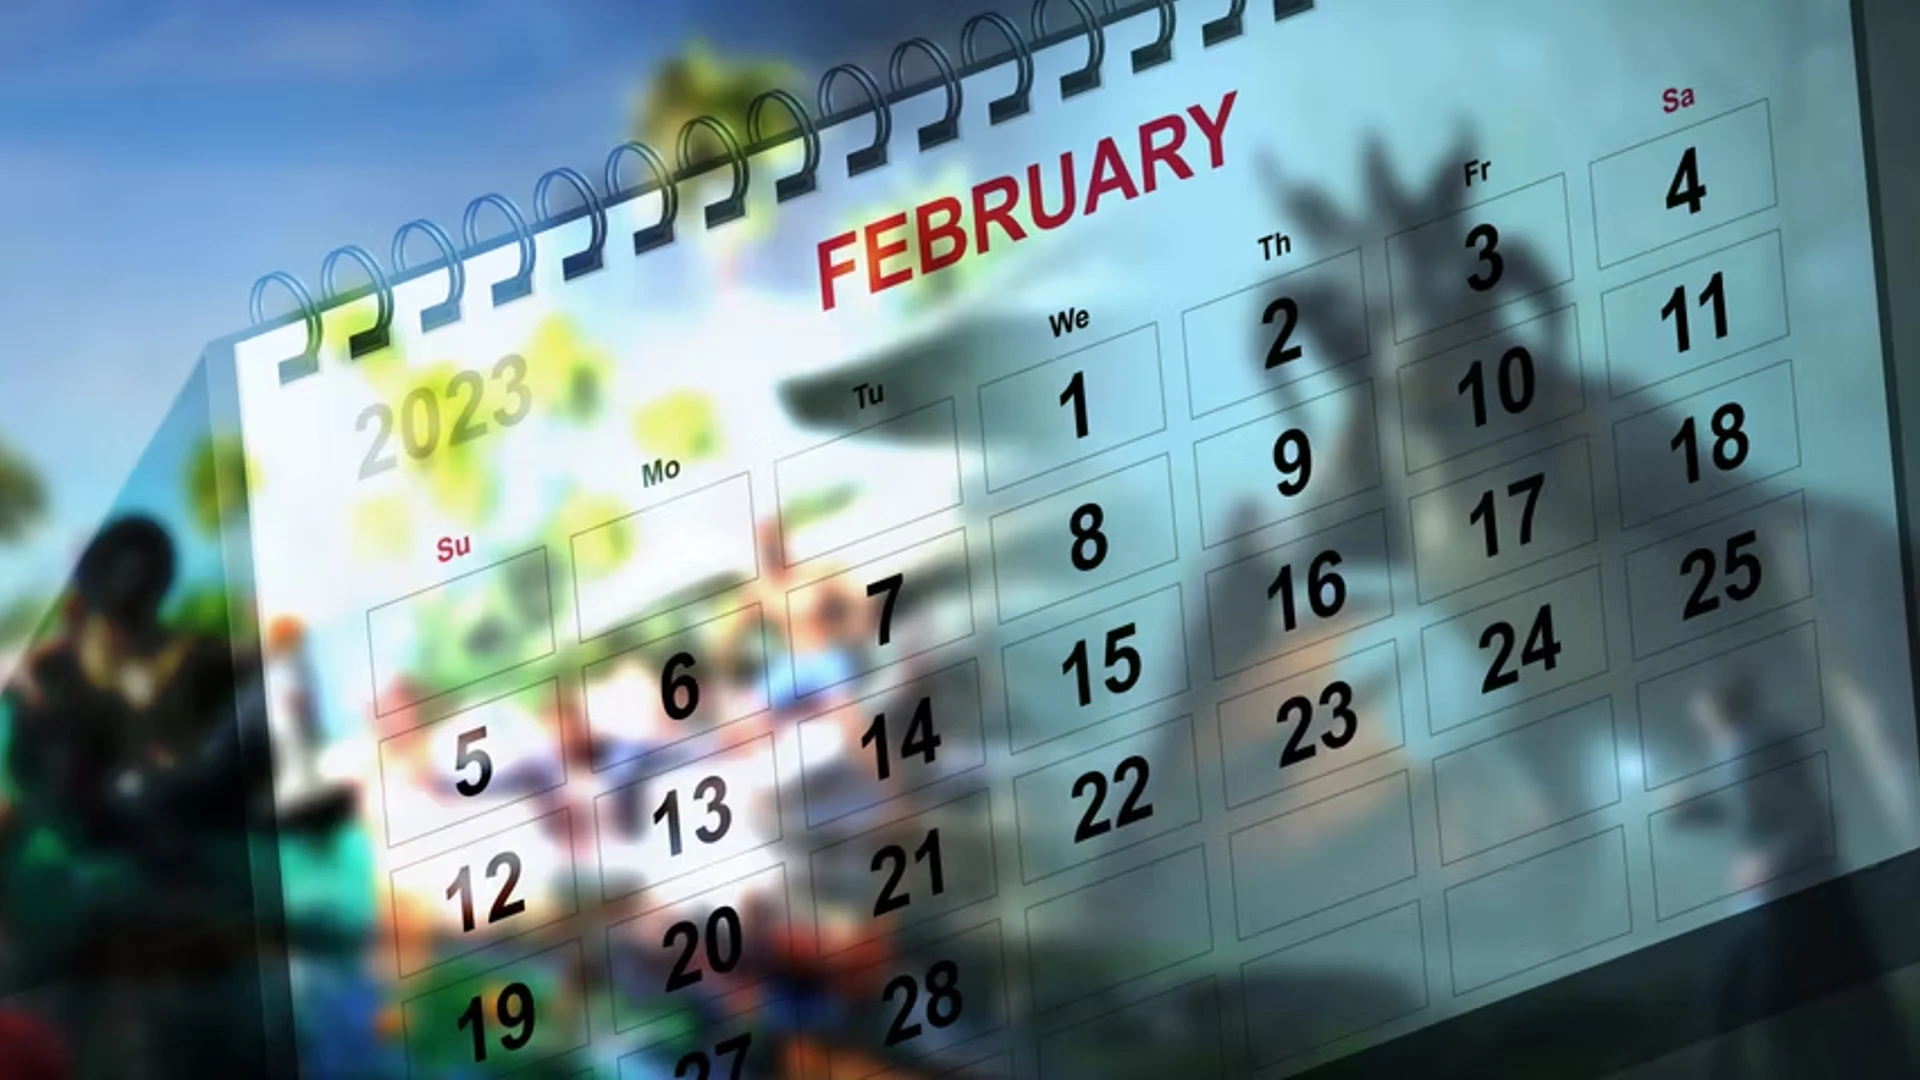 February 2023 is Currently Looking Like a Huge Month for Gaming